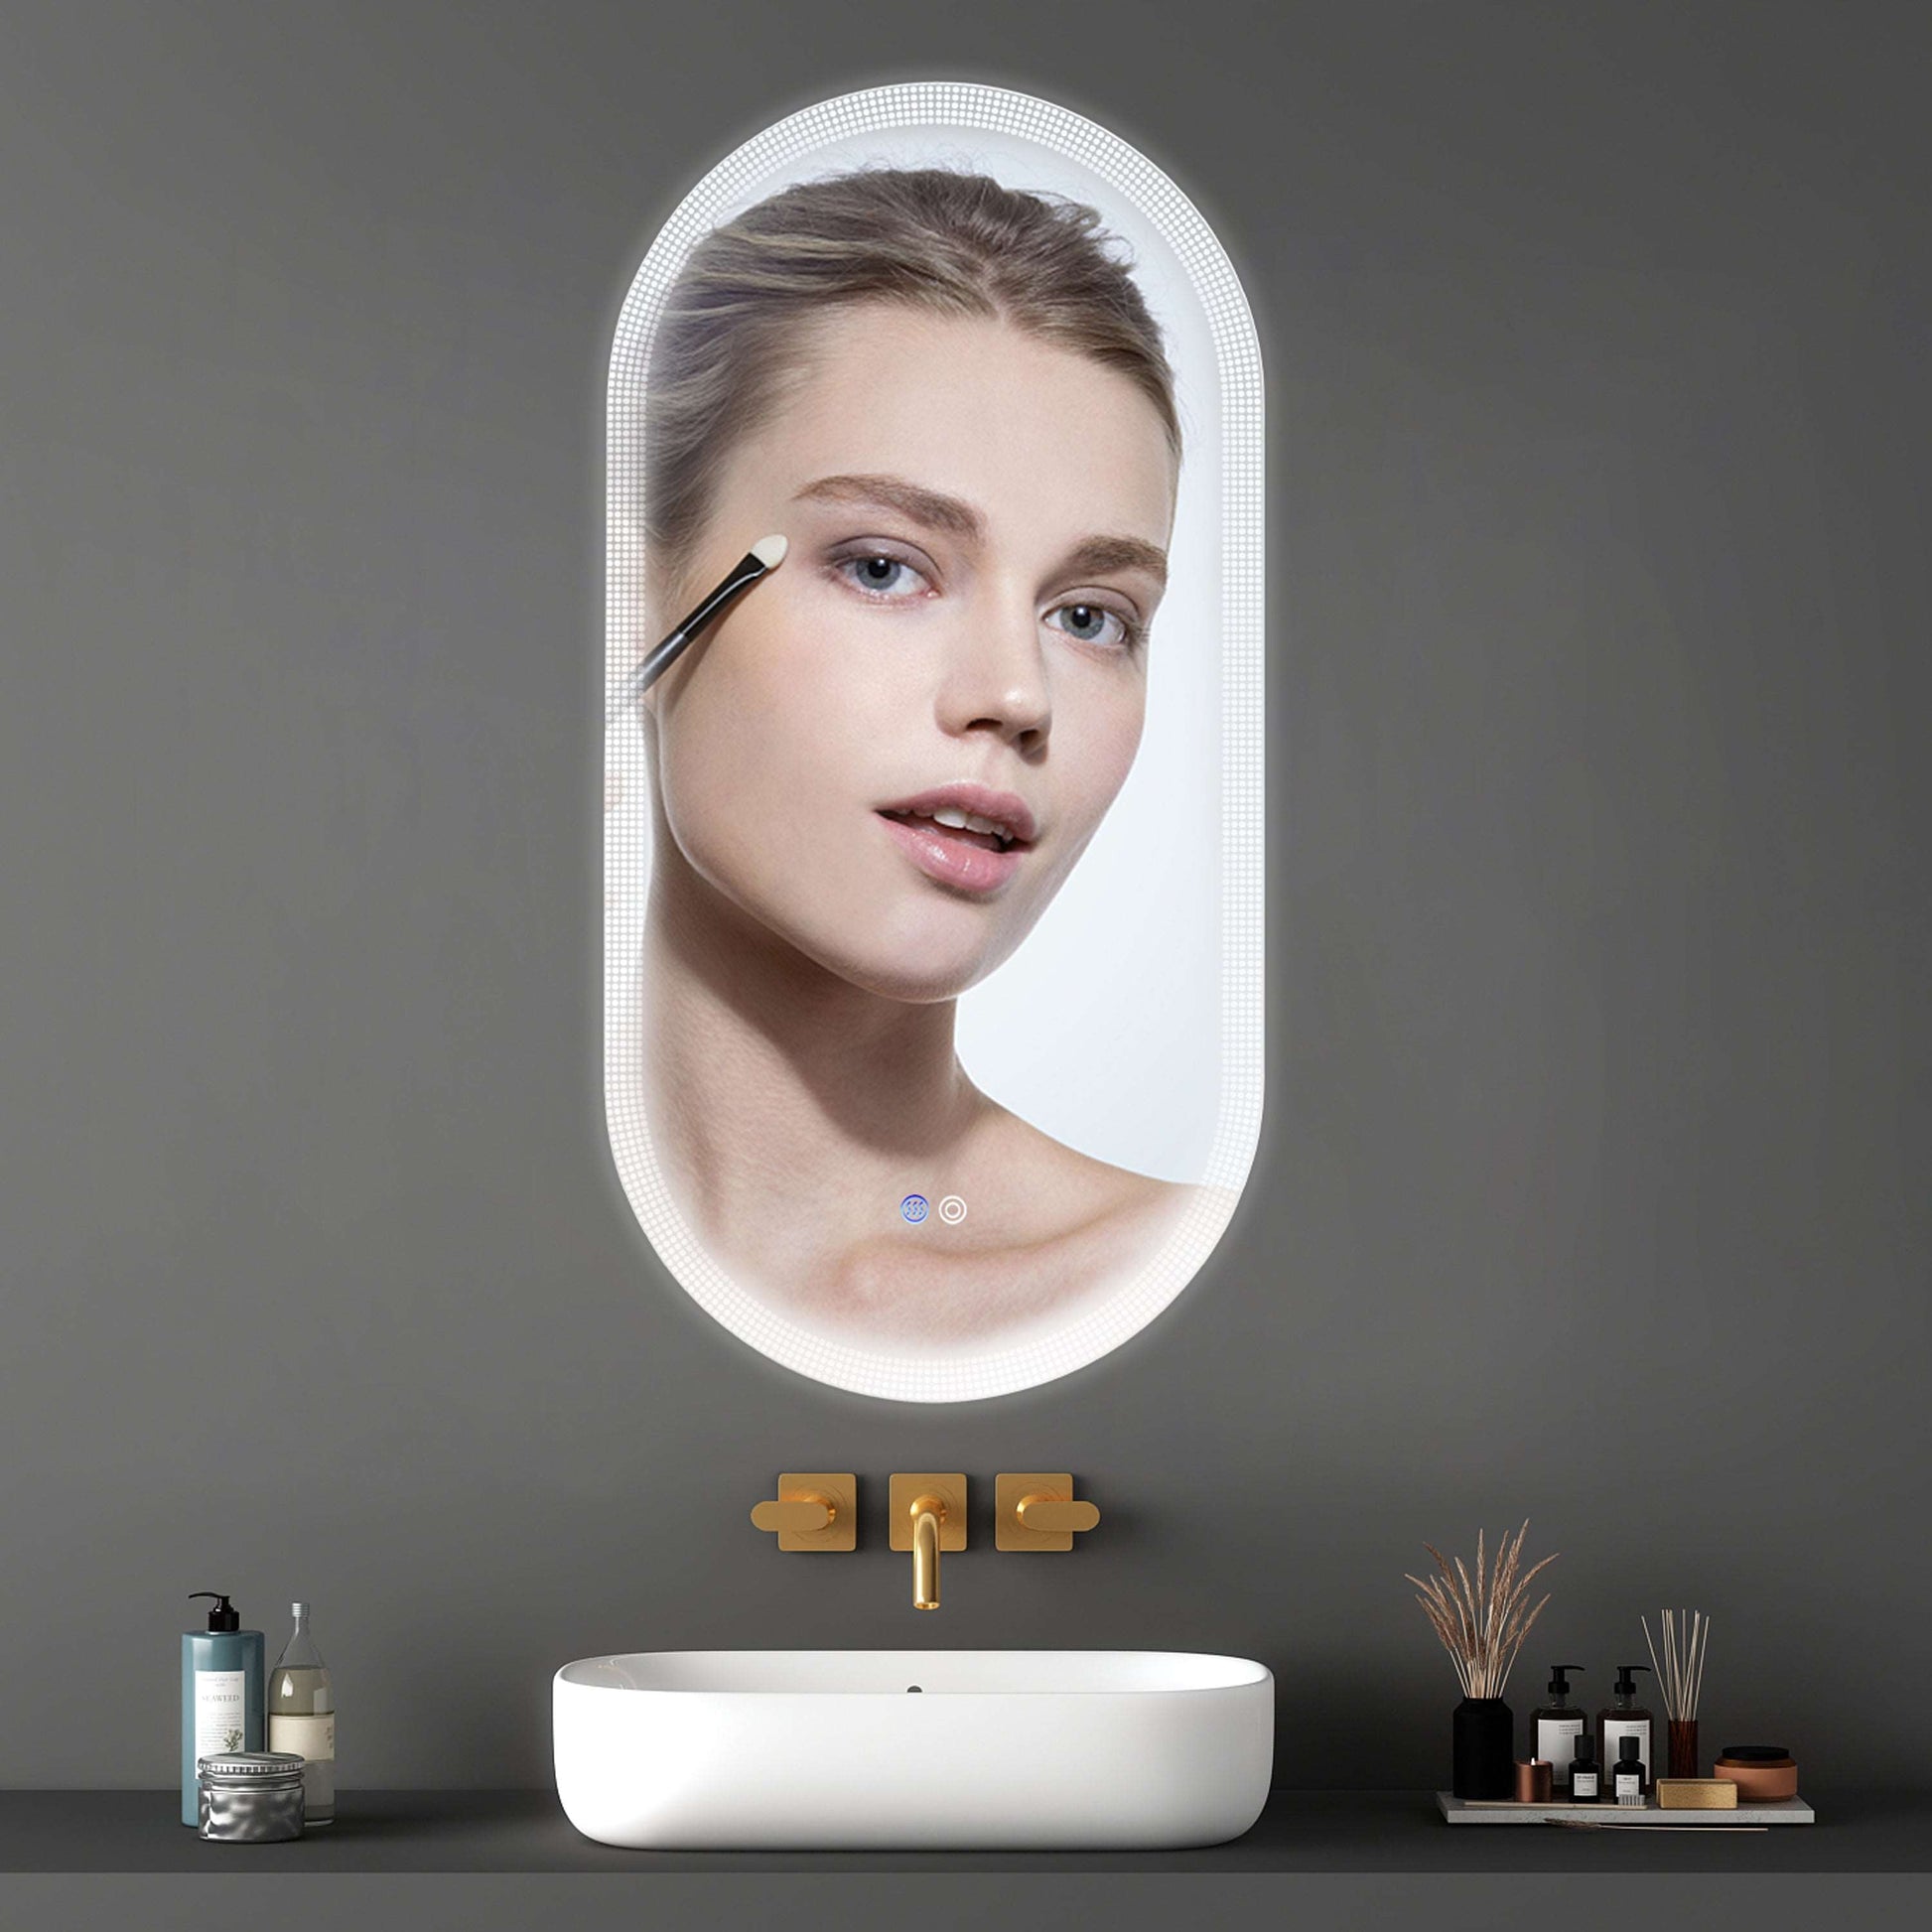 Dimmable Switch-Held Memory LED Bathroom Mirror color:White